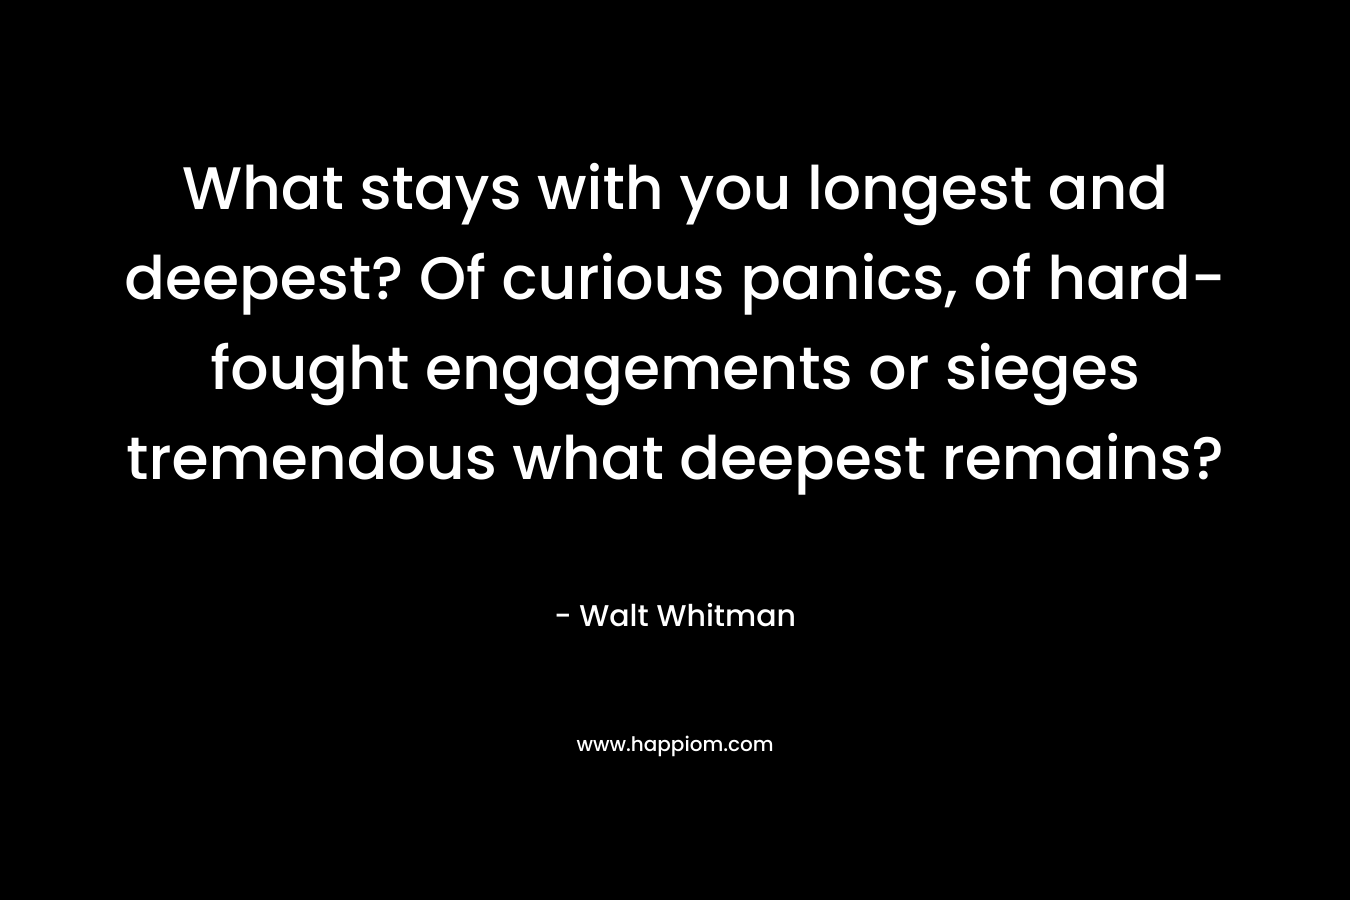 What stays with you longest and deepest? Of curious panics, of hard-fought engagements or sieges tremendous what deepest remains? – Walt Whitman